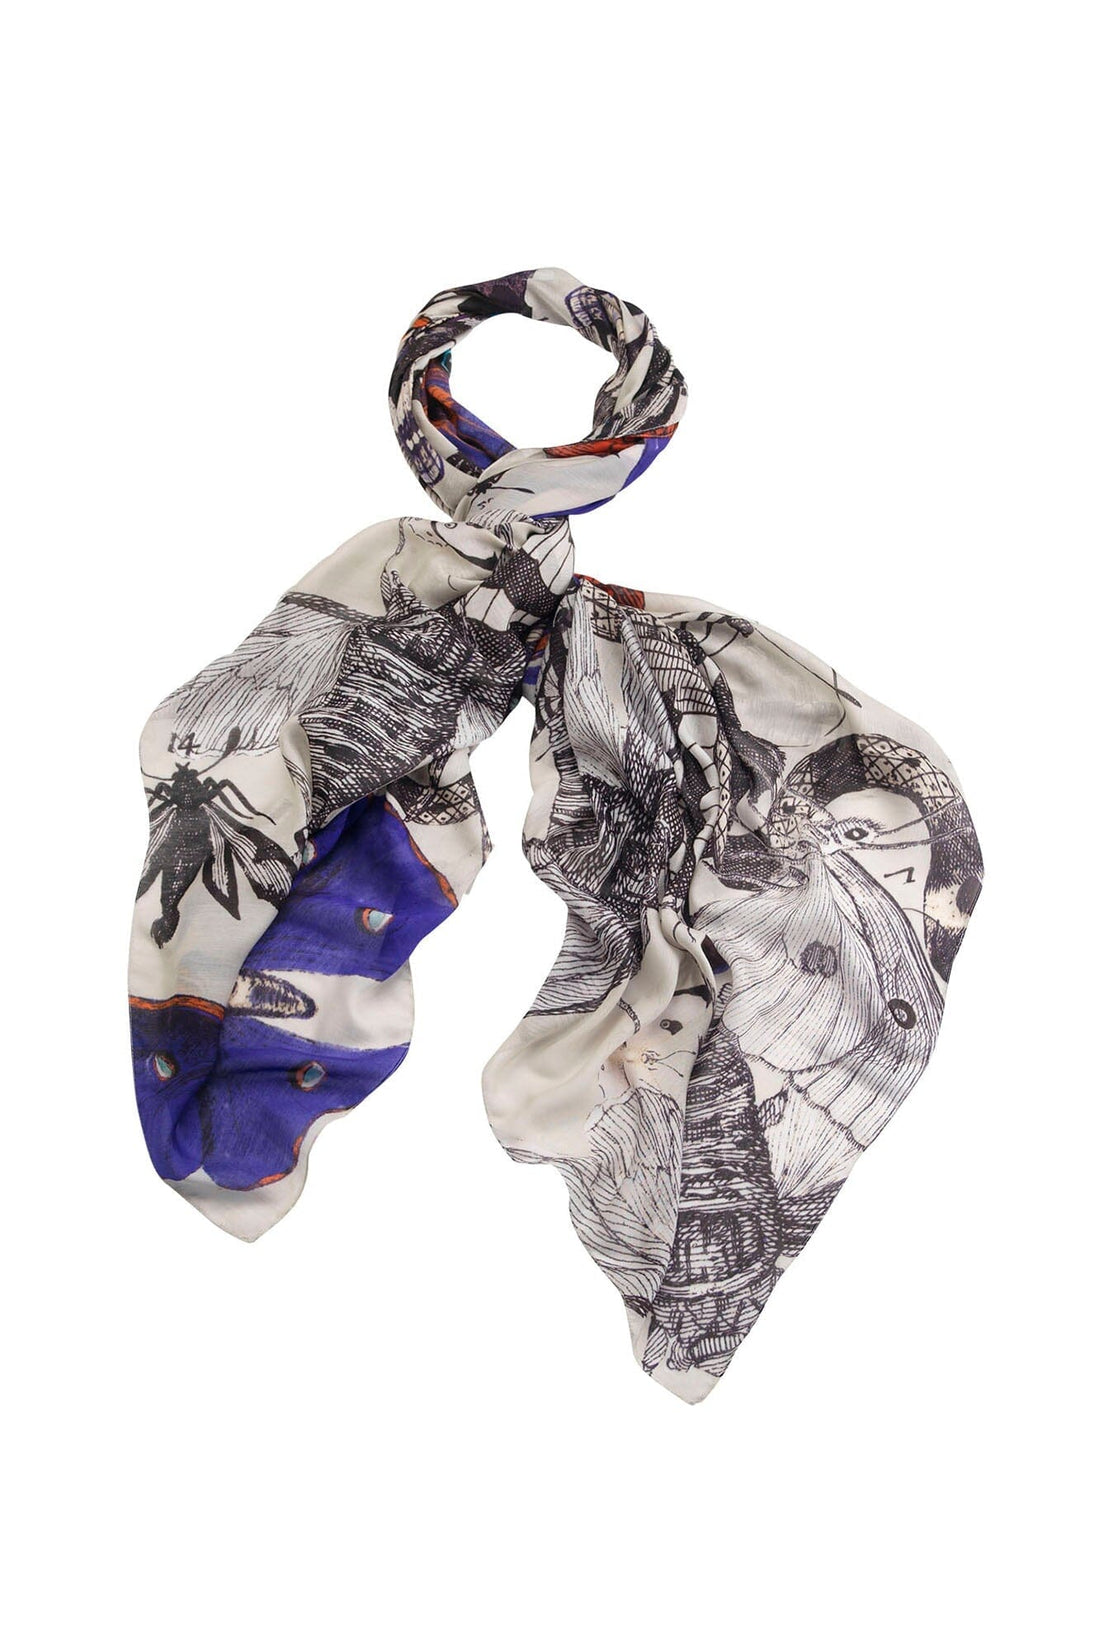 One Hundred Stars Printed Lightweight Scarf in Butterflies Cobalt Print - SCABUTCOB Scarves One Hundred Stars